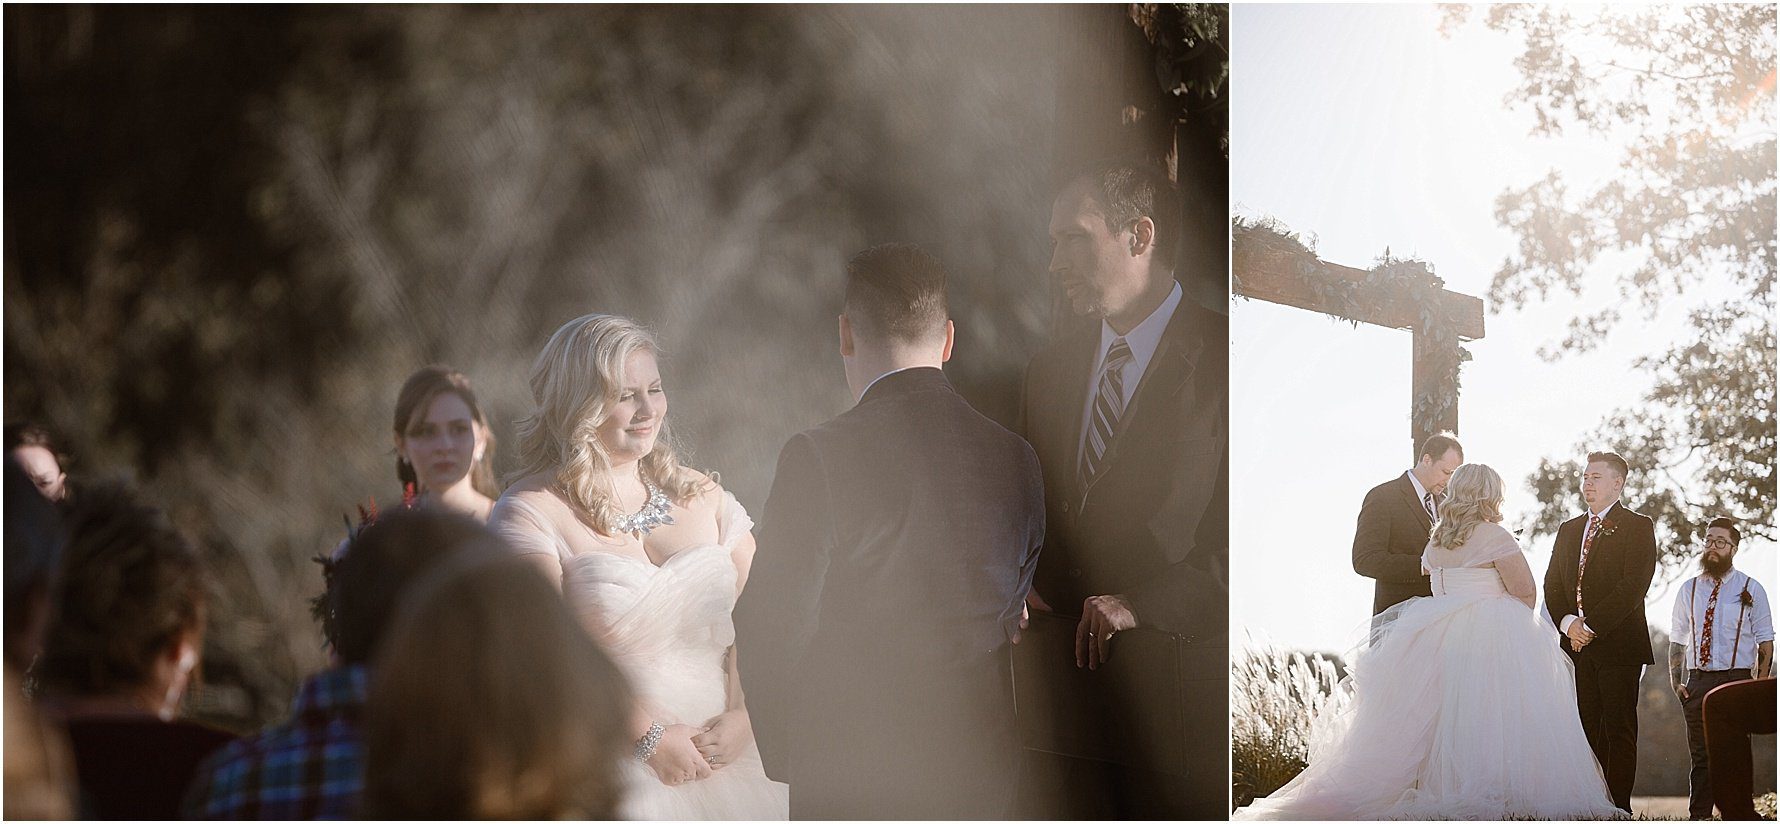 Wedding Photographers in Knoxville | Erin Morrison Photography www.erinmorrisonphotography.com